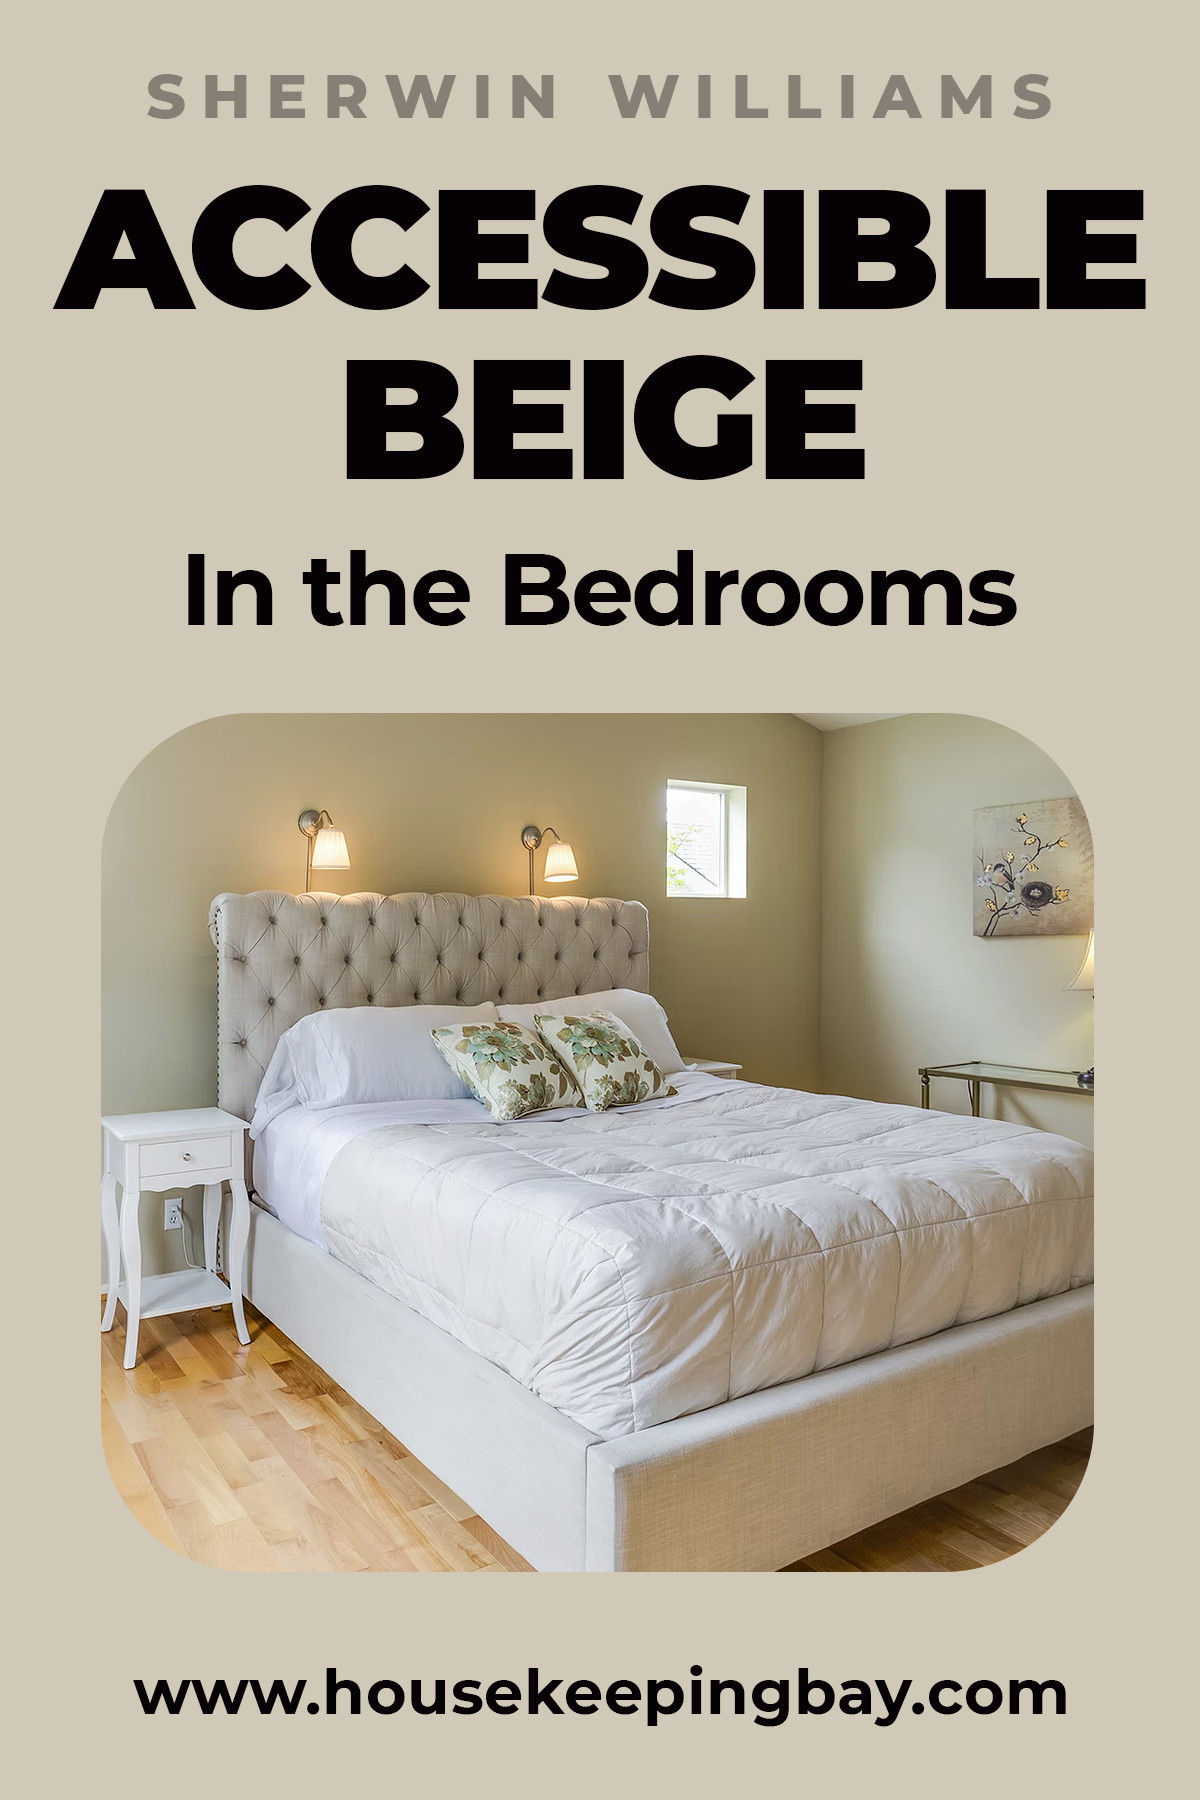 Accessible Beige in the Bedrooms